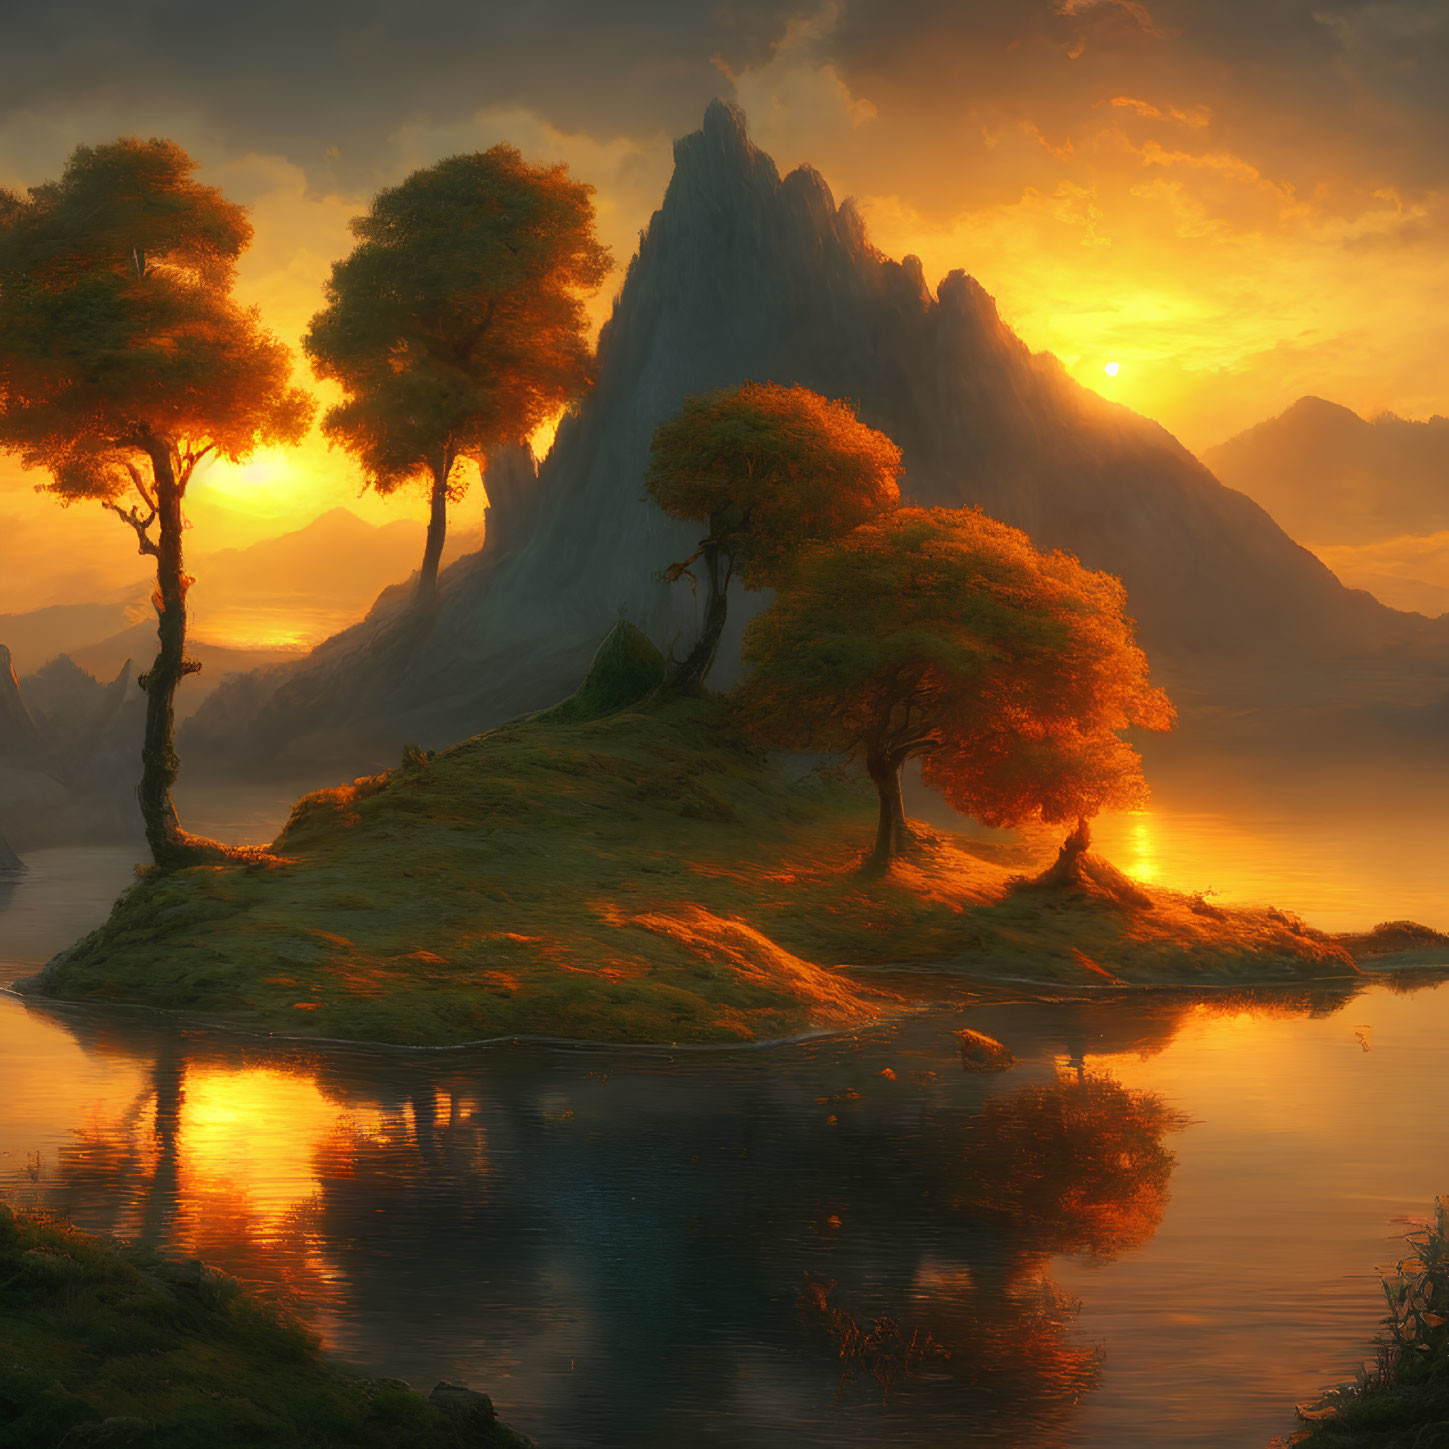 Tranquil lake sunset with island, golden trees, mountain view